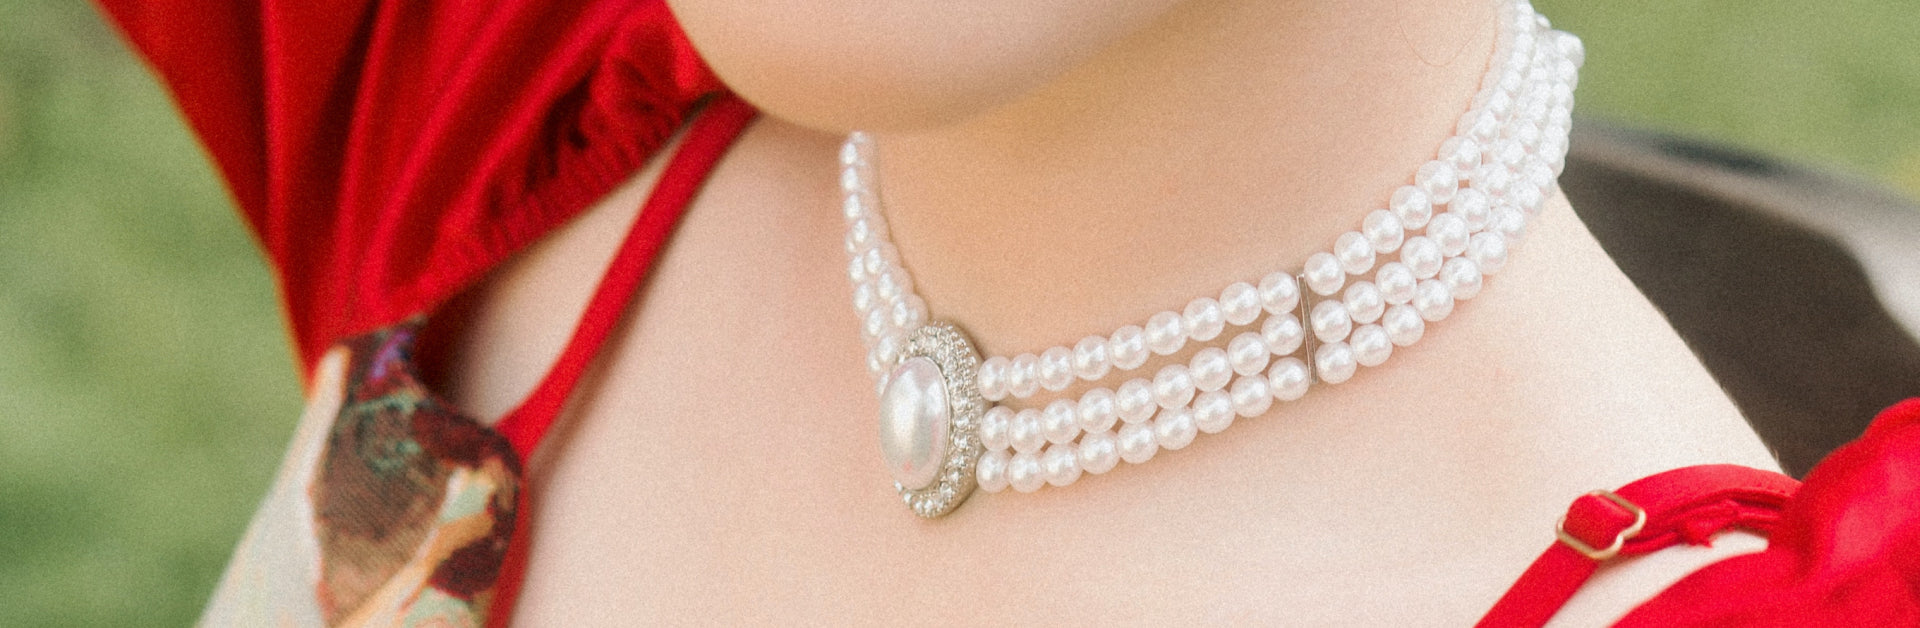 Shine With Pearl Necklaces-Timeless Elegance For Every Occasion With Different Styles